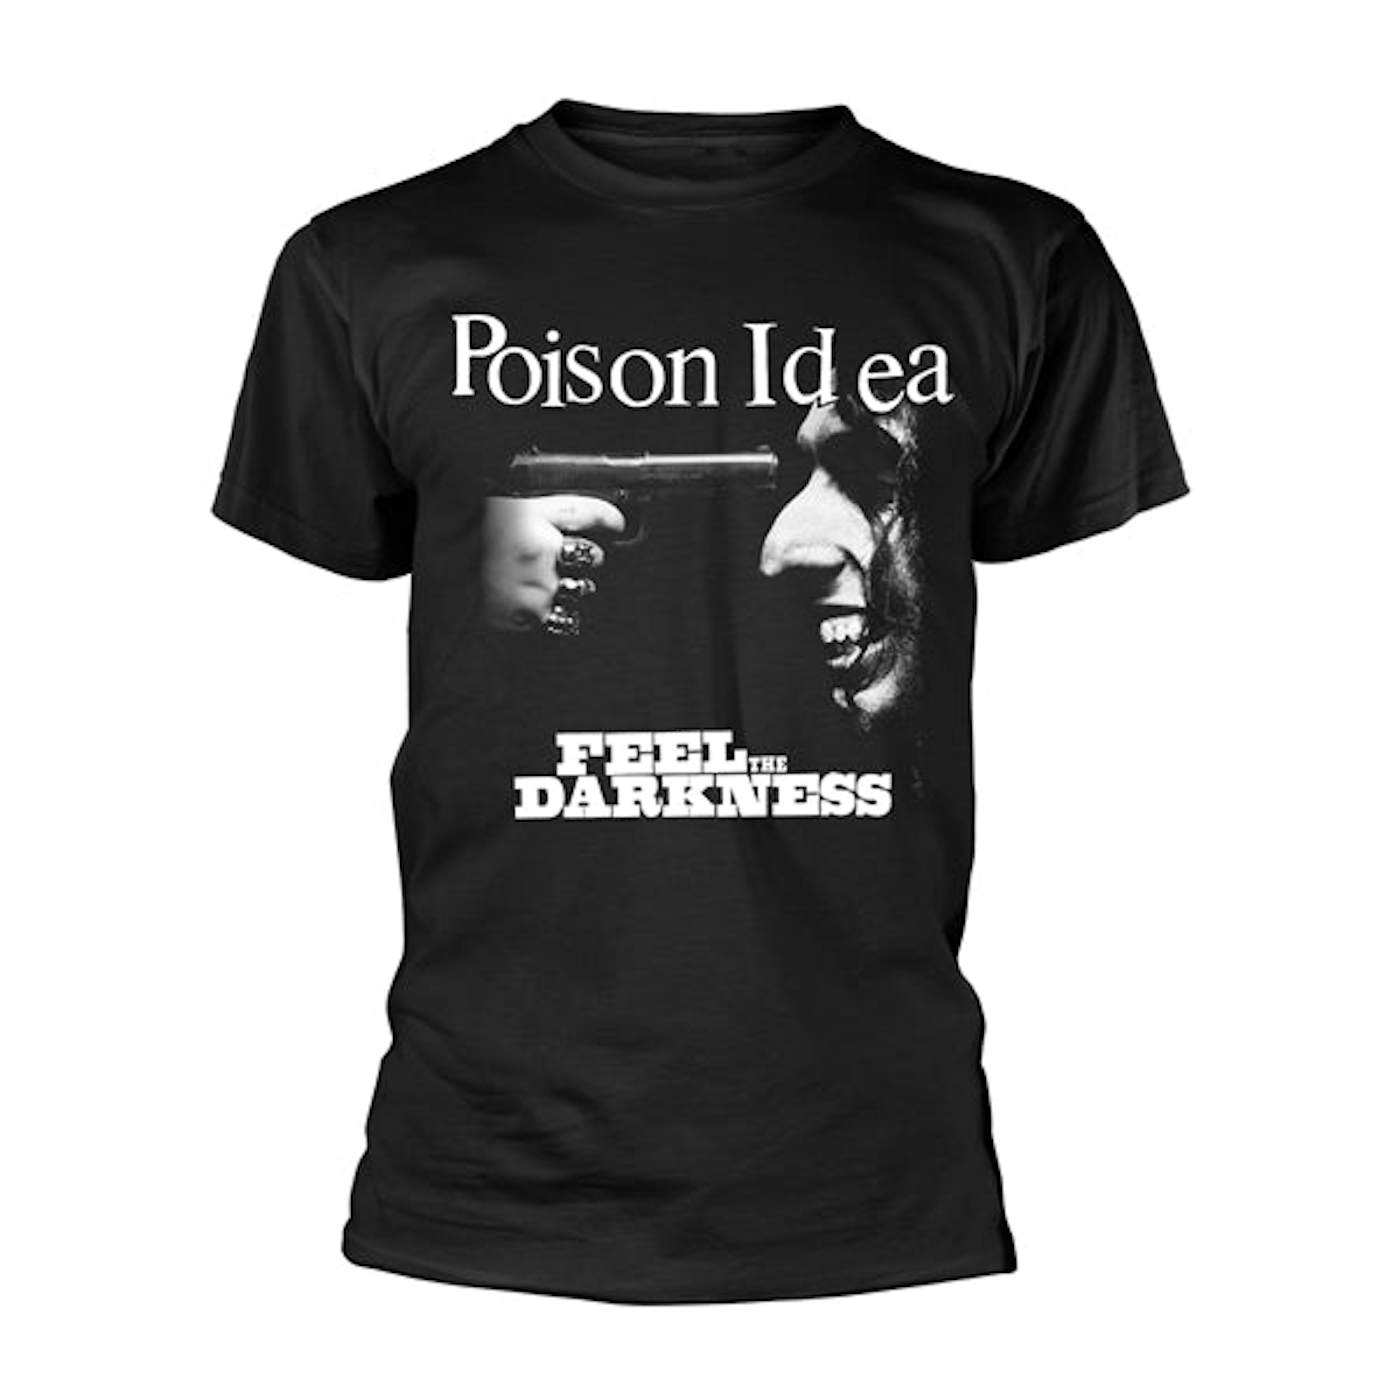 Poison Idea T Shirt - Feel The Darkness